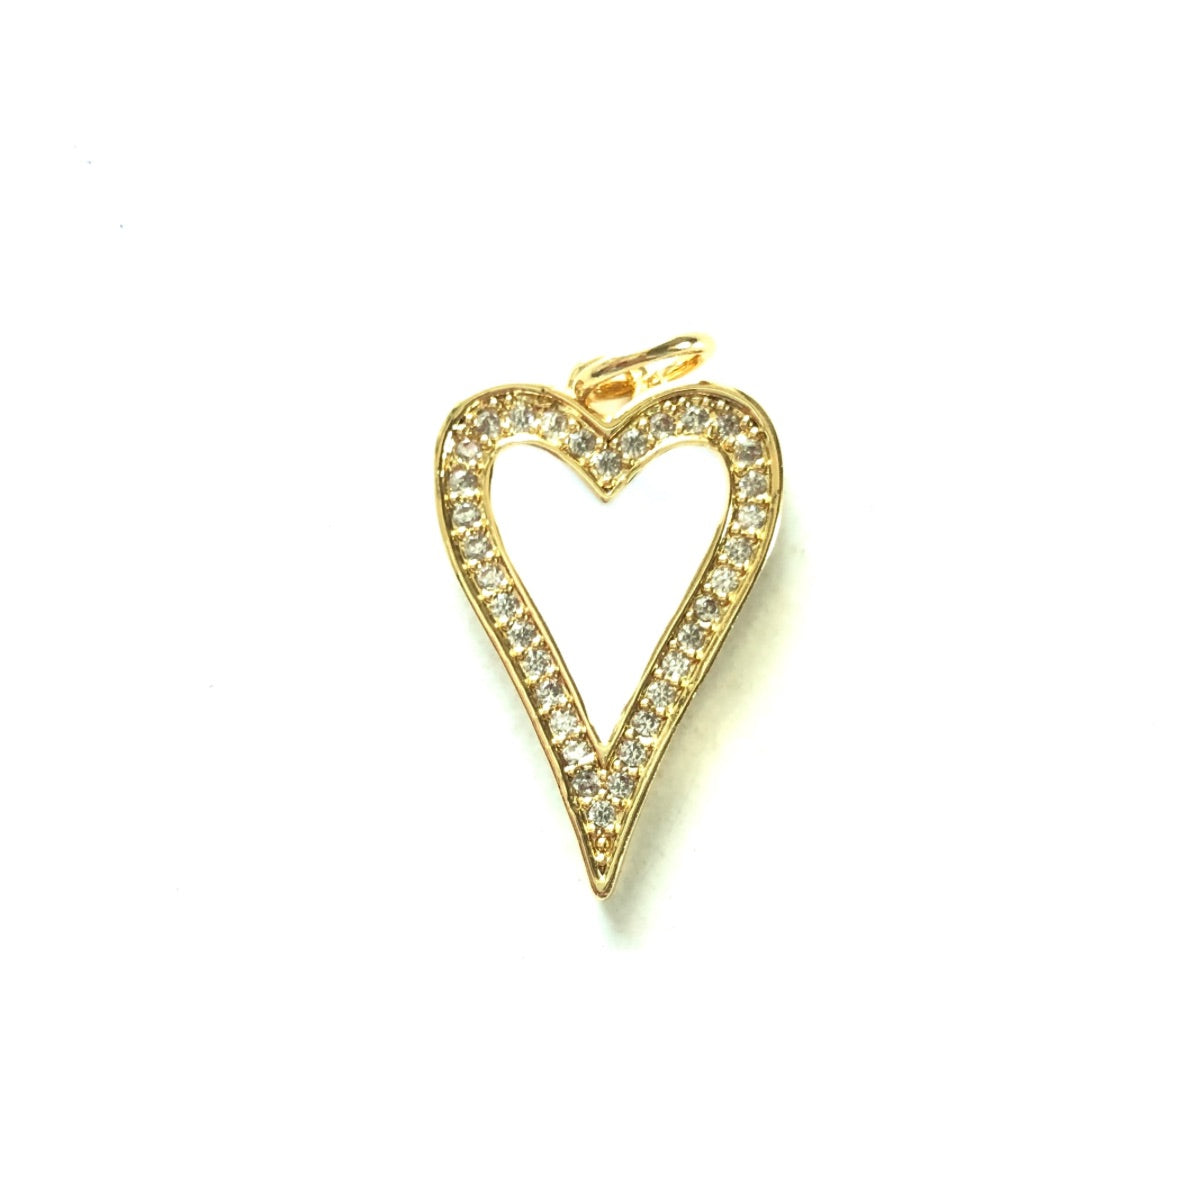 10pcs/lot 23.4*14.6mm Red, Pink, White, Black, Fuchsia Enamel CZ Pave Heart Charms-Gold White CZ Paved Charms Hearts New Charms Arrivals Charms Beads Beyond